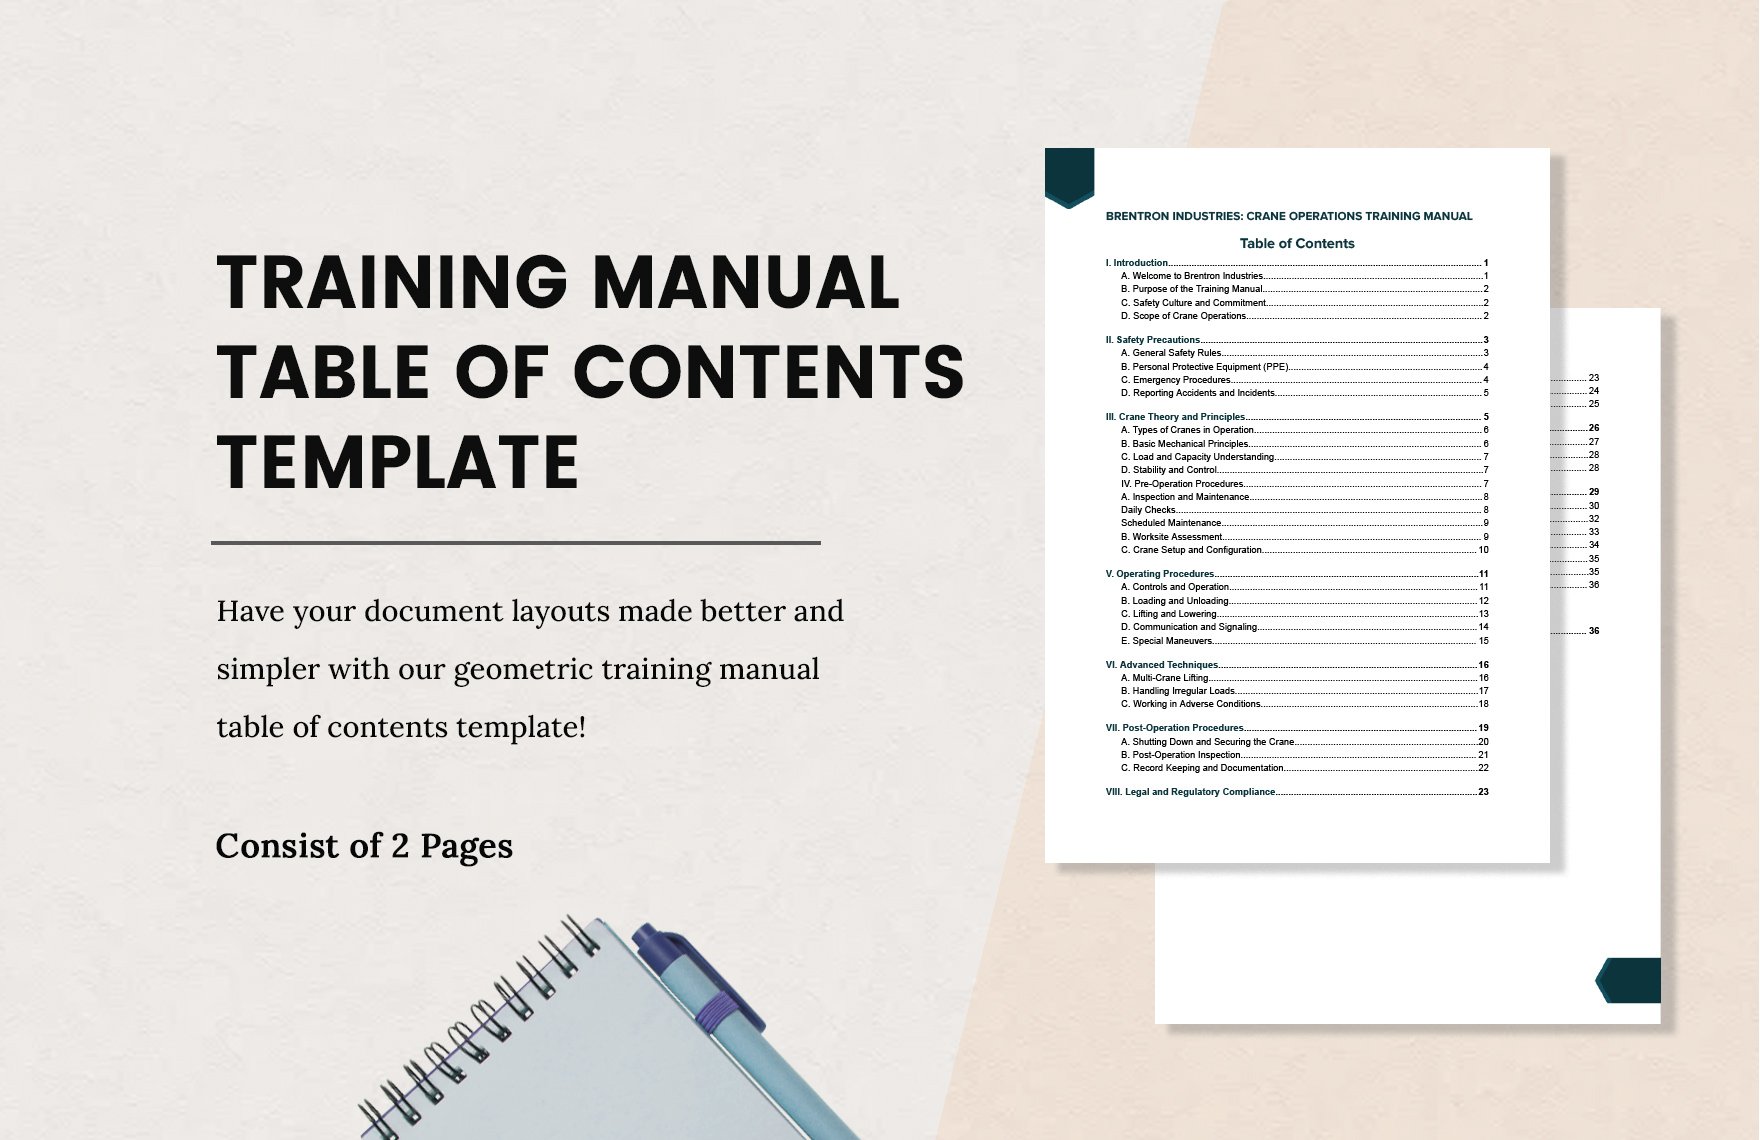 Training Manual Table of Contents Template